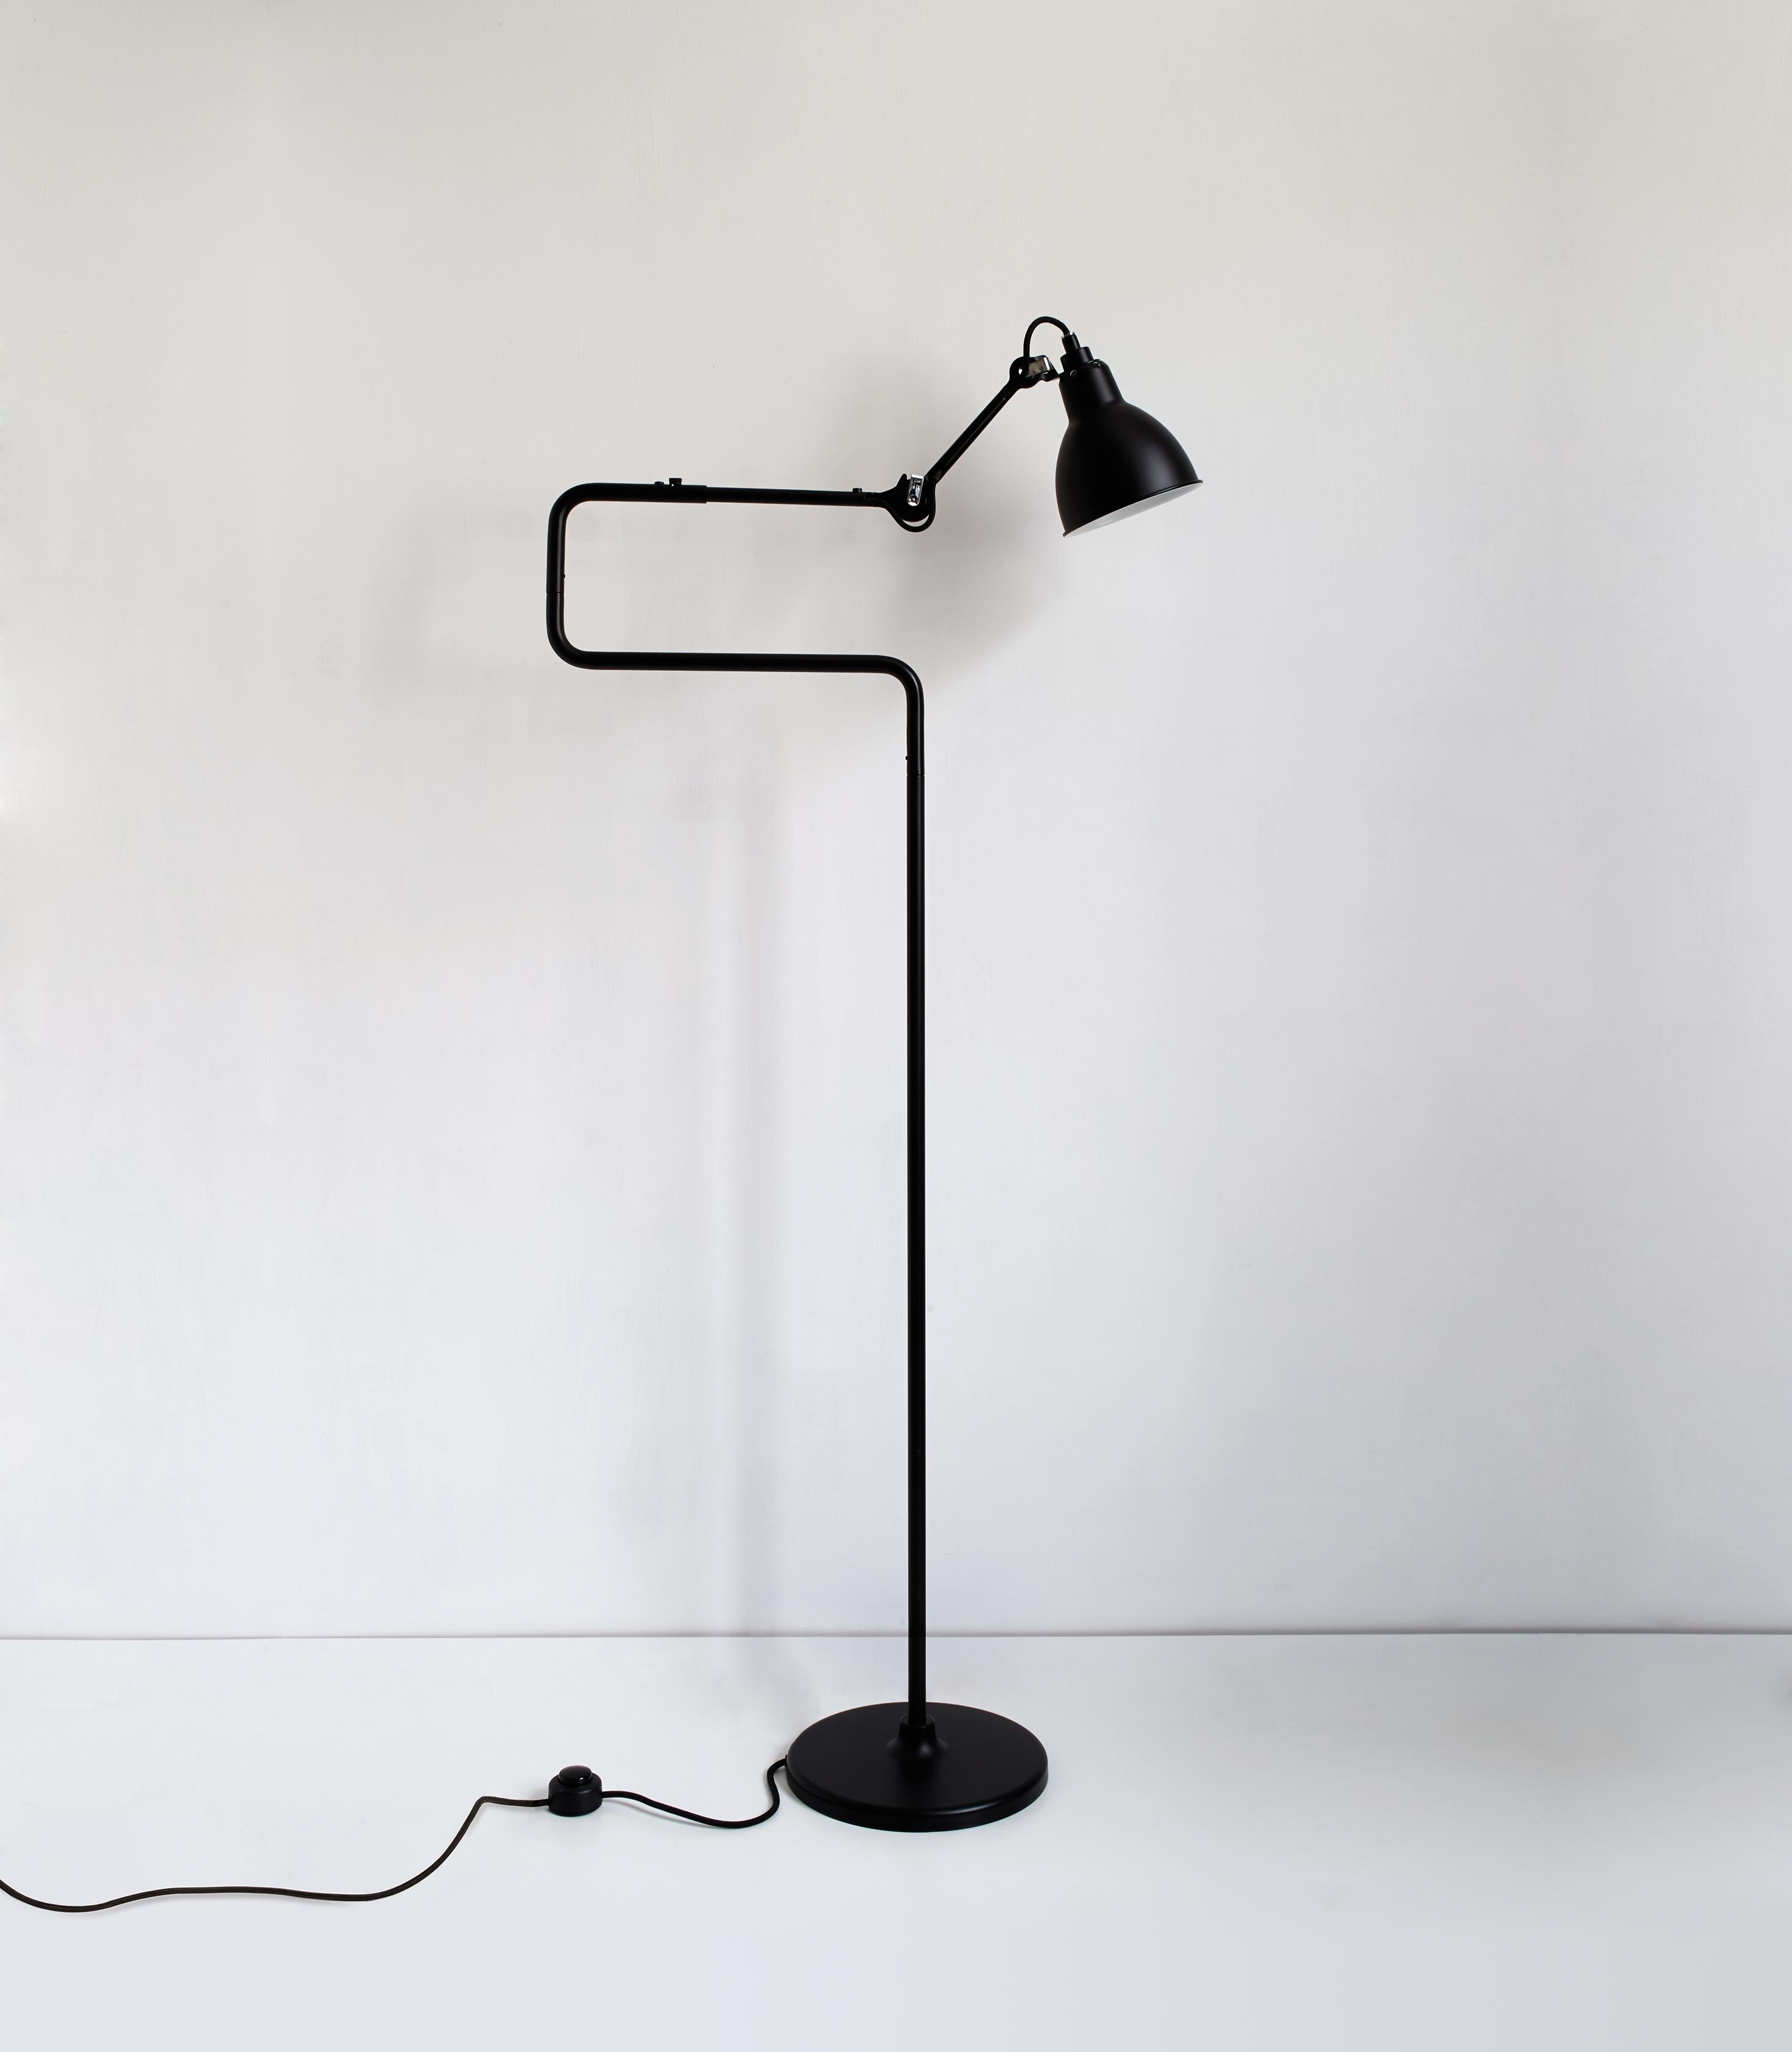 Black Lampe Gras N° 411 floor lamp by Bernard-Albin Gras
Dimensions: D 72 x W 32 x H 211 cm.
Materials: Steel.
Also available: different colors and other shade available.

All our lamps can be wired according to each country. If sold to the USA